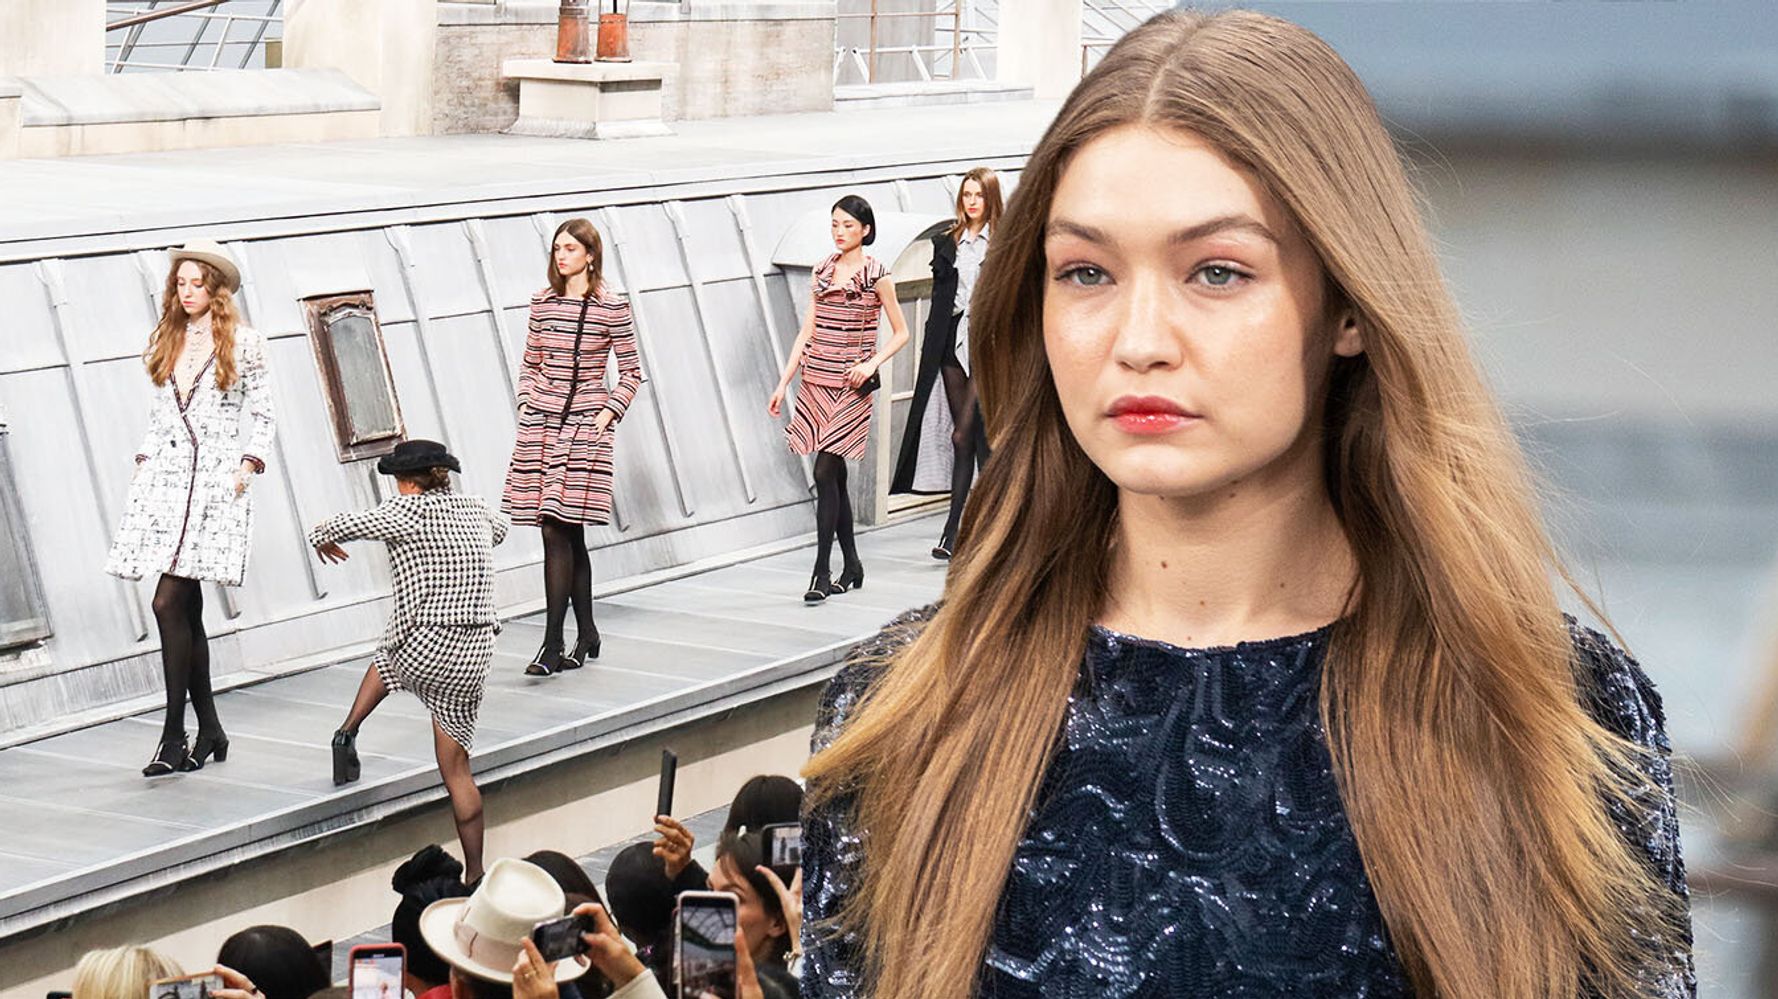 Comedian Gatecrashes Chanel Catwalk – Much To Gigi Hadid's Disapproval